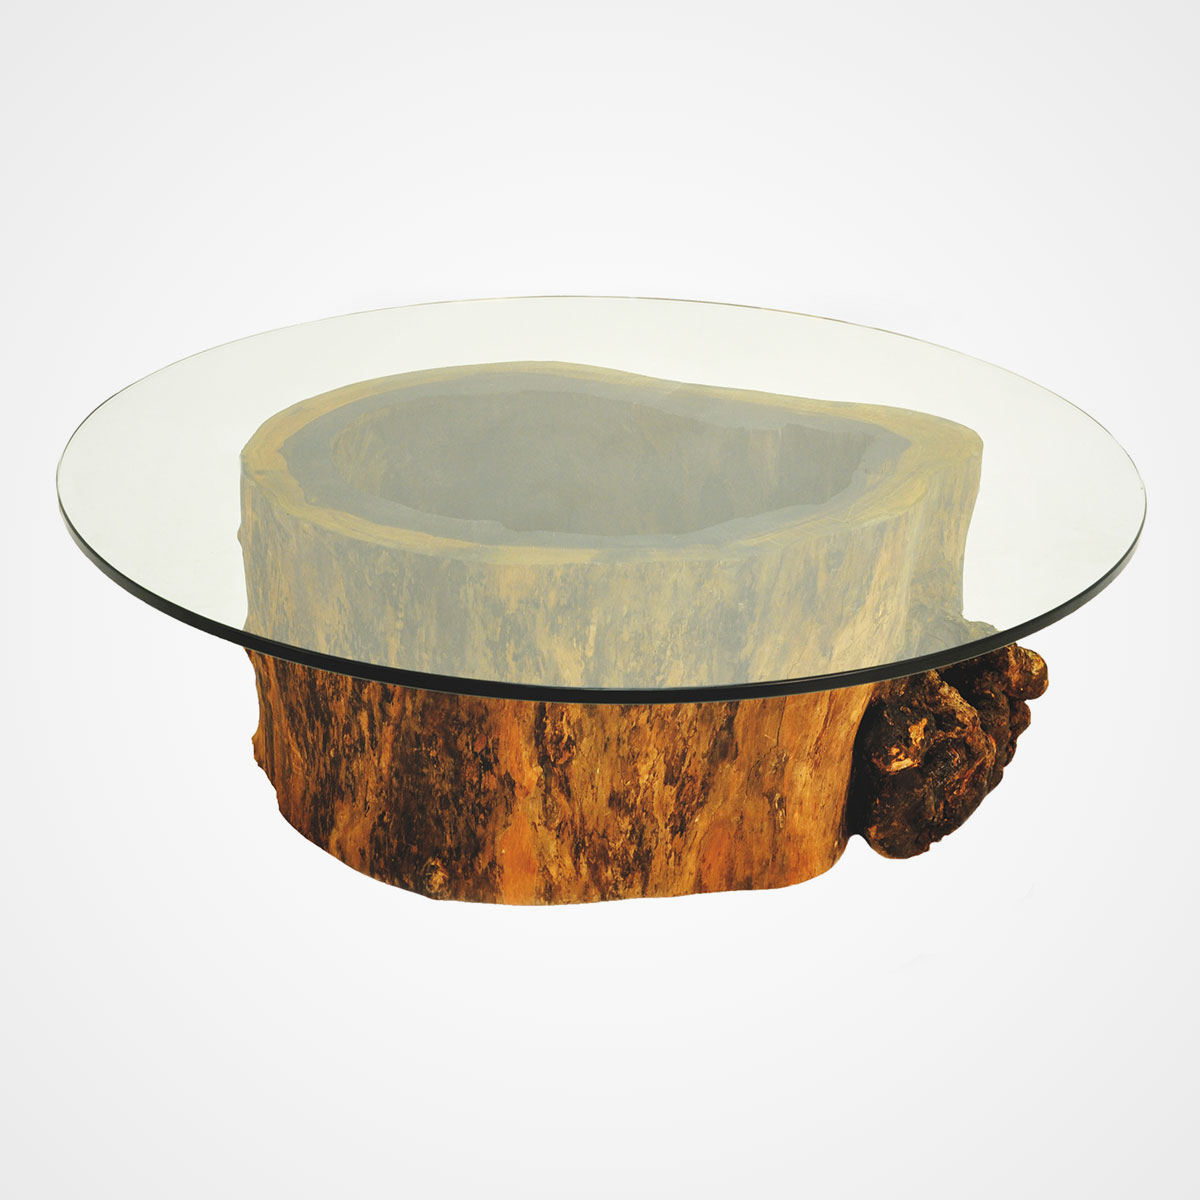 Stylish Round Glass Top Coffee Table with Wooden Base